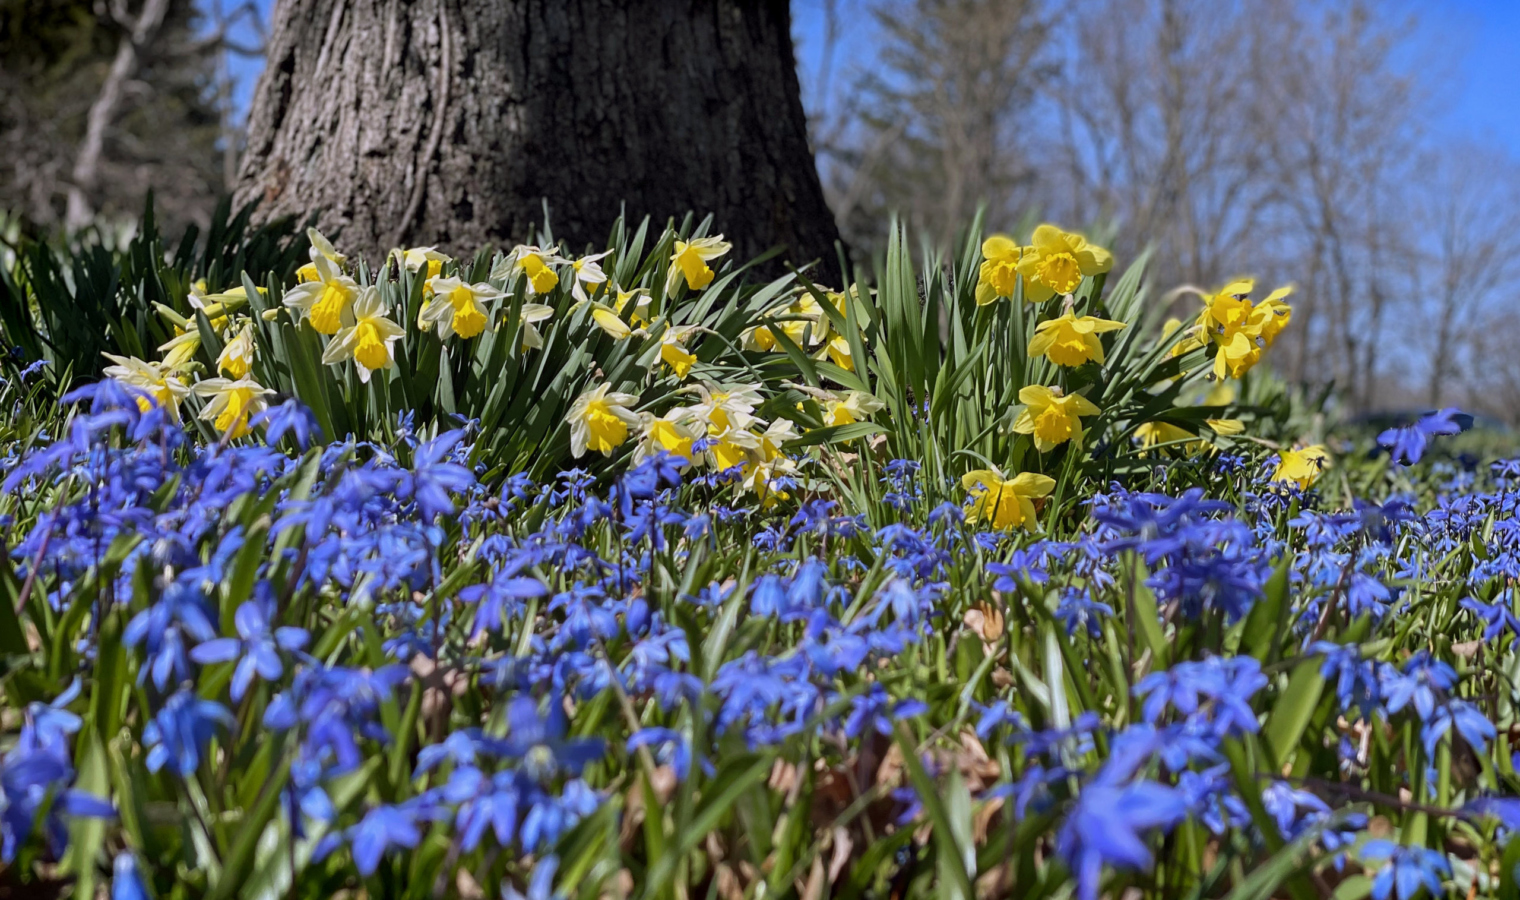 Photograph of blue Siberian squill flowers and yellow daffodils blooming beneath a tree in Daffodil Glade on the West Side of The Morton Arboretum